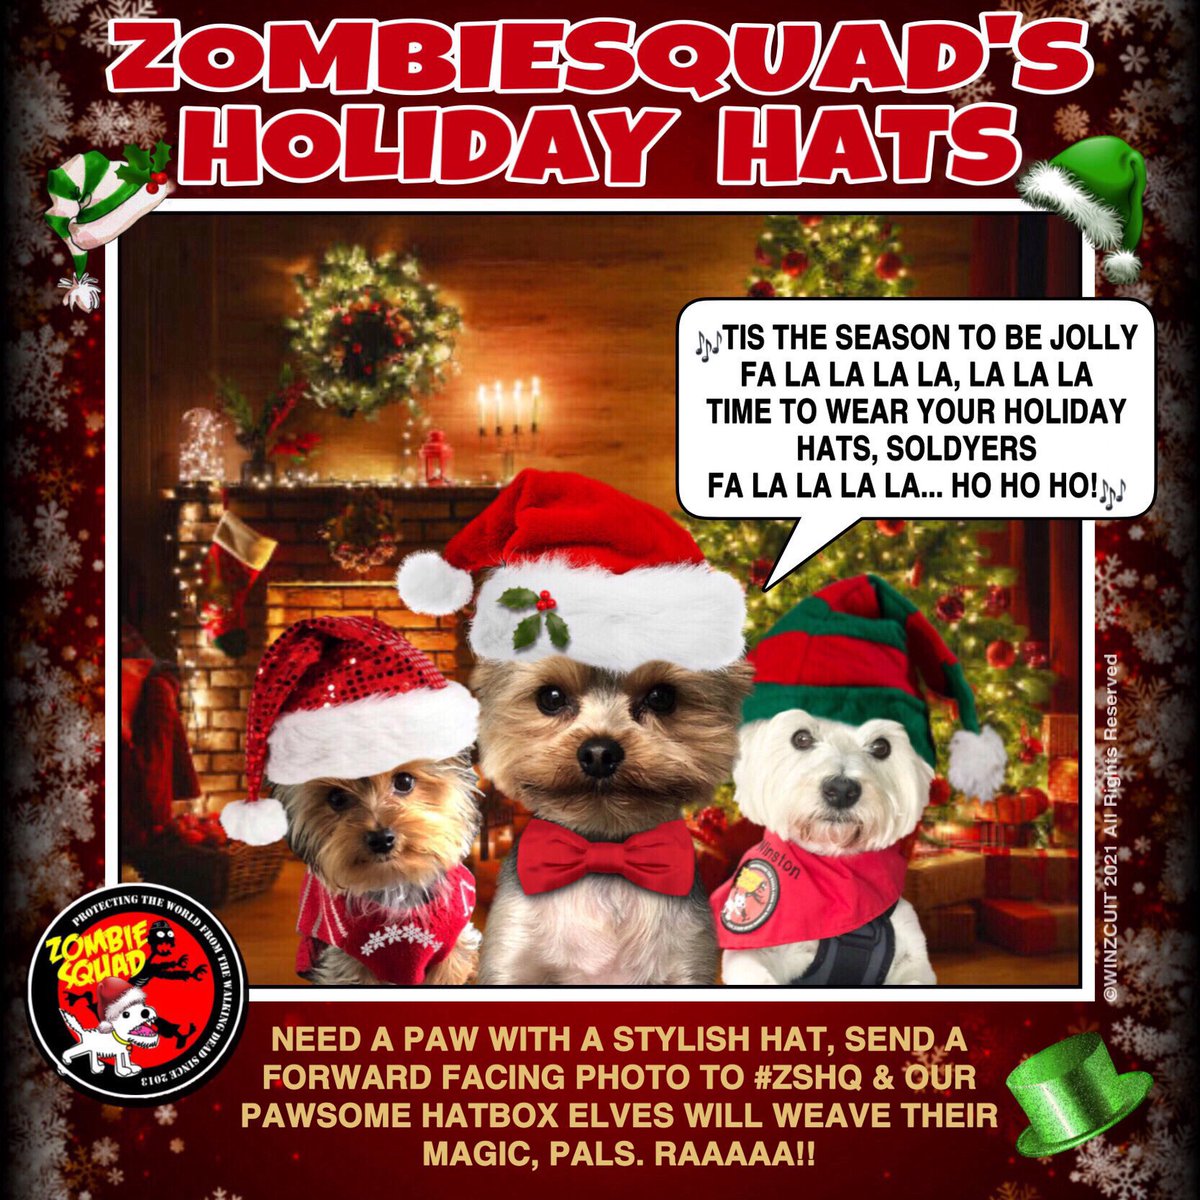 #zshq 🎅🏽🧑🏽‍🎄🤶🎄🎅🏽🧑🏽‍🎄🤶🎄🎅🏽🧑🏽‍🎄🤶🎄🎅🏽🧑🏽‍🎄🤶🎄🎅🏽🧑🏽‍🎄🤶🎄 Dont forget your Christmas hats. The HAT gang are at it again😁😂😄😅😀😆🤣 (I can some too if ya want)